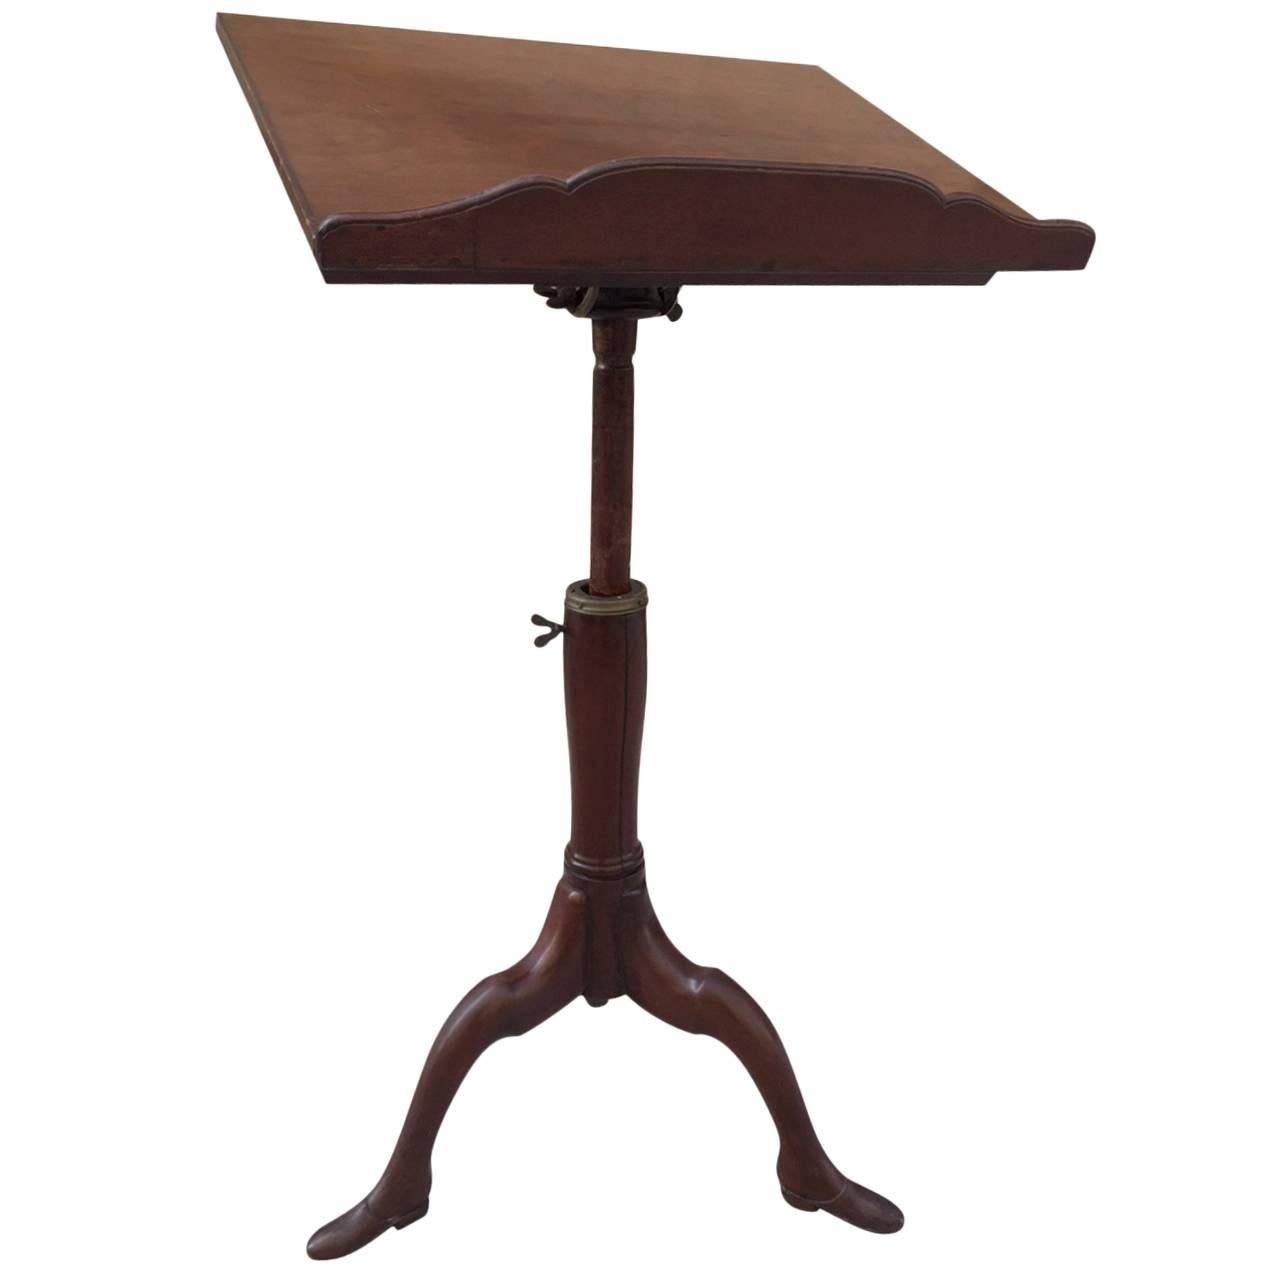 Georgian Mahogany Adjustable Dictionary / Music Stand with Carved Shoe Feet